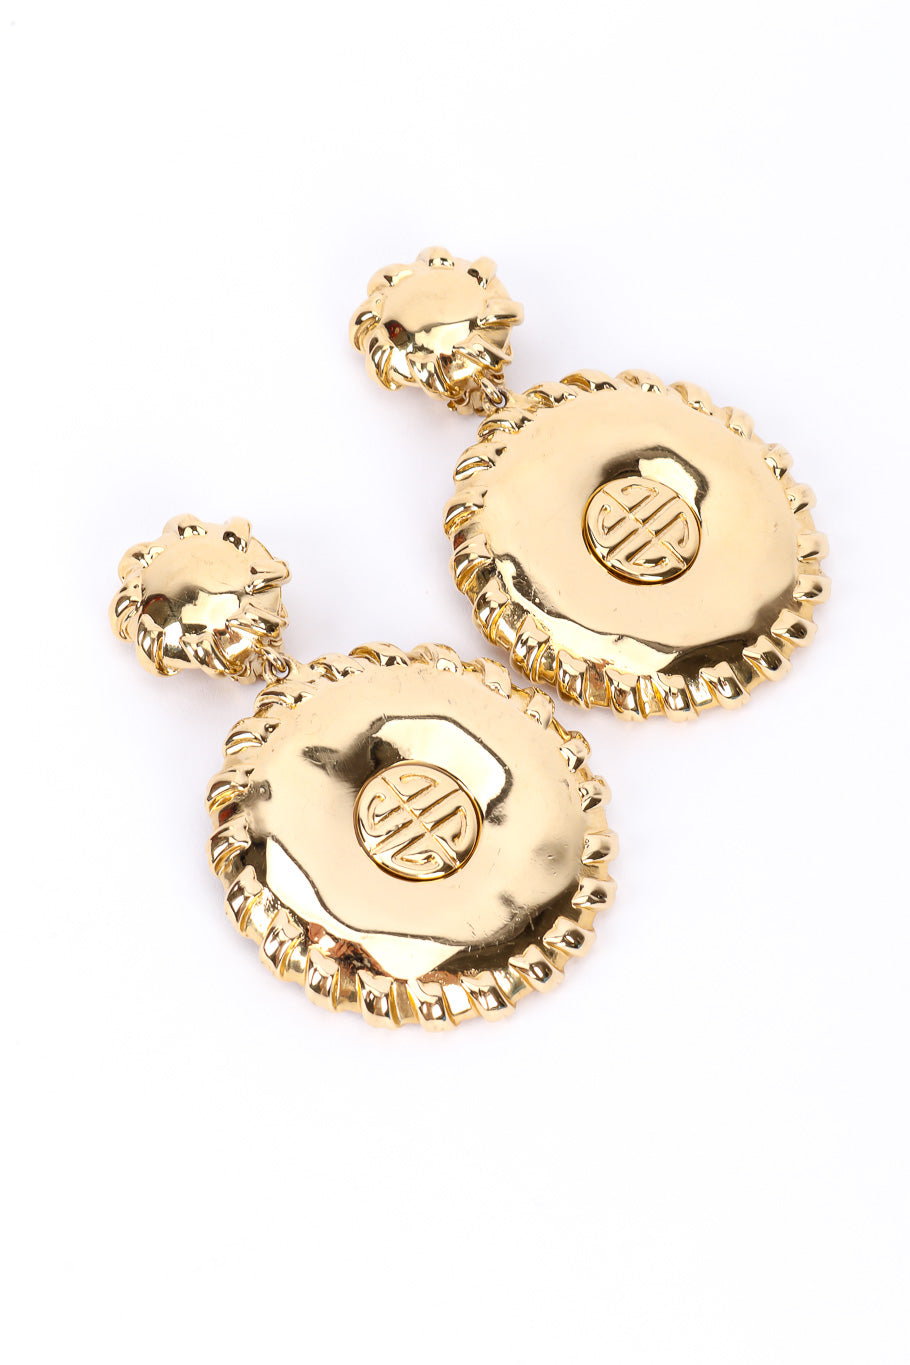 Medallion drop earrings by Givenchy side by side on white background @recessla